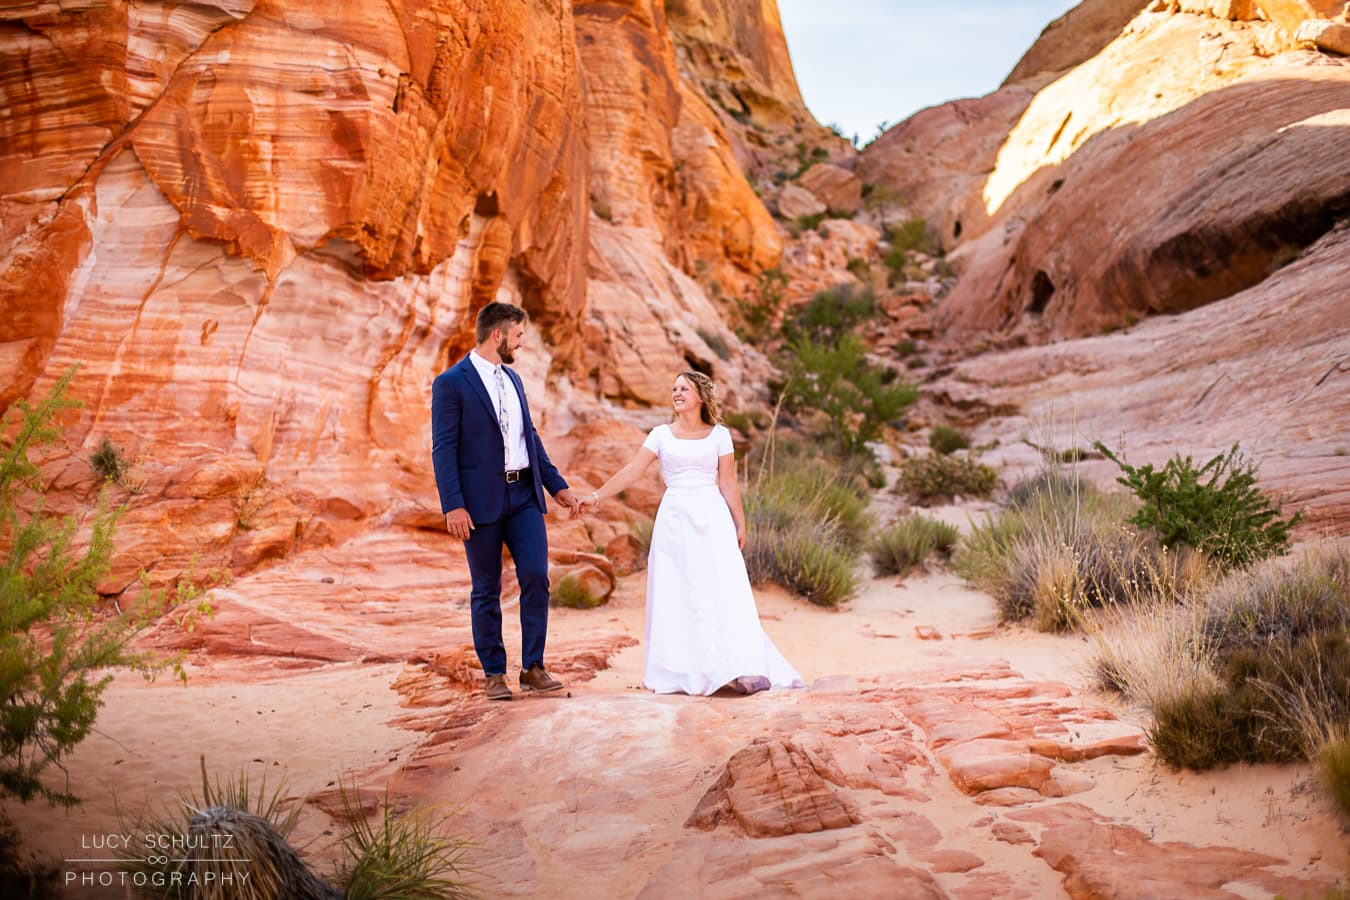 A bride and groom walk through the colorful desert rocks of Valley of Fire.